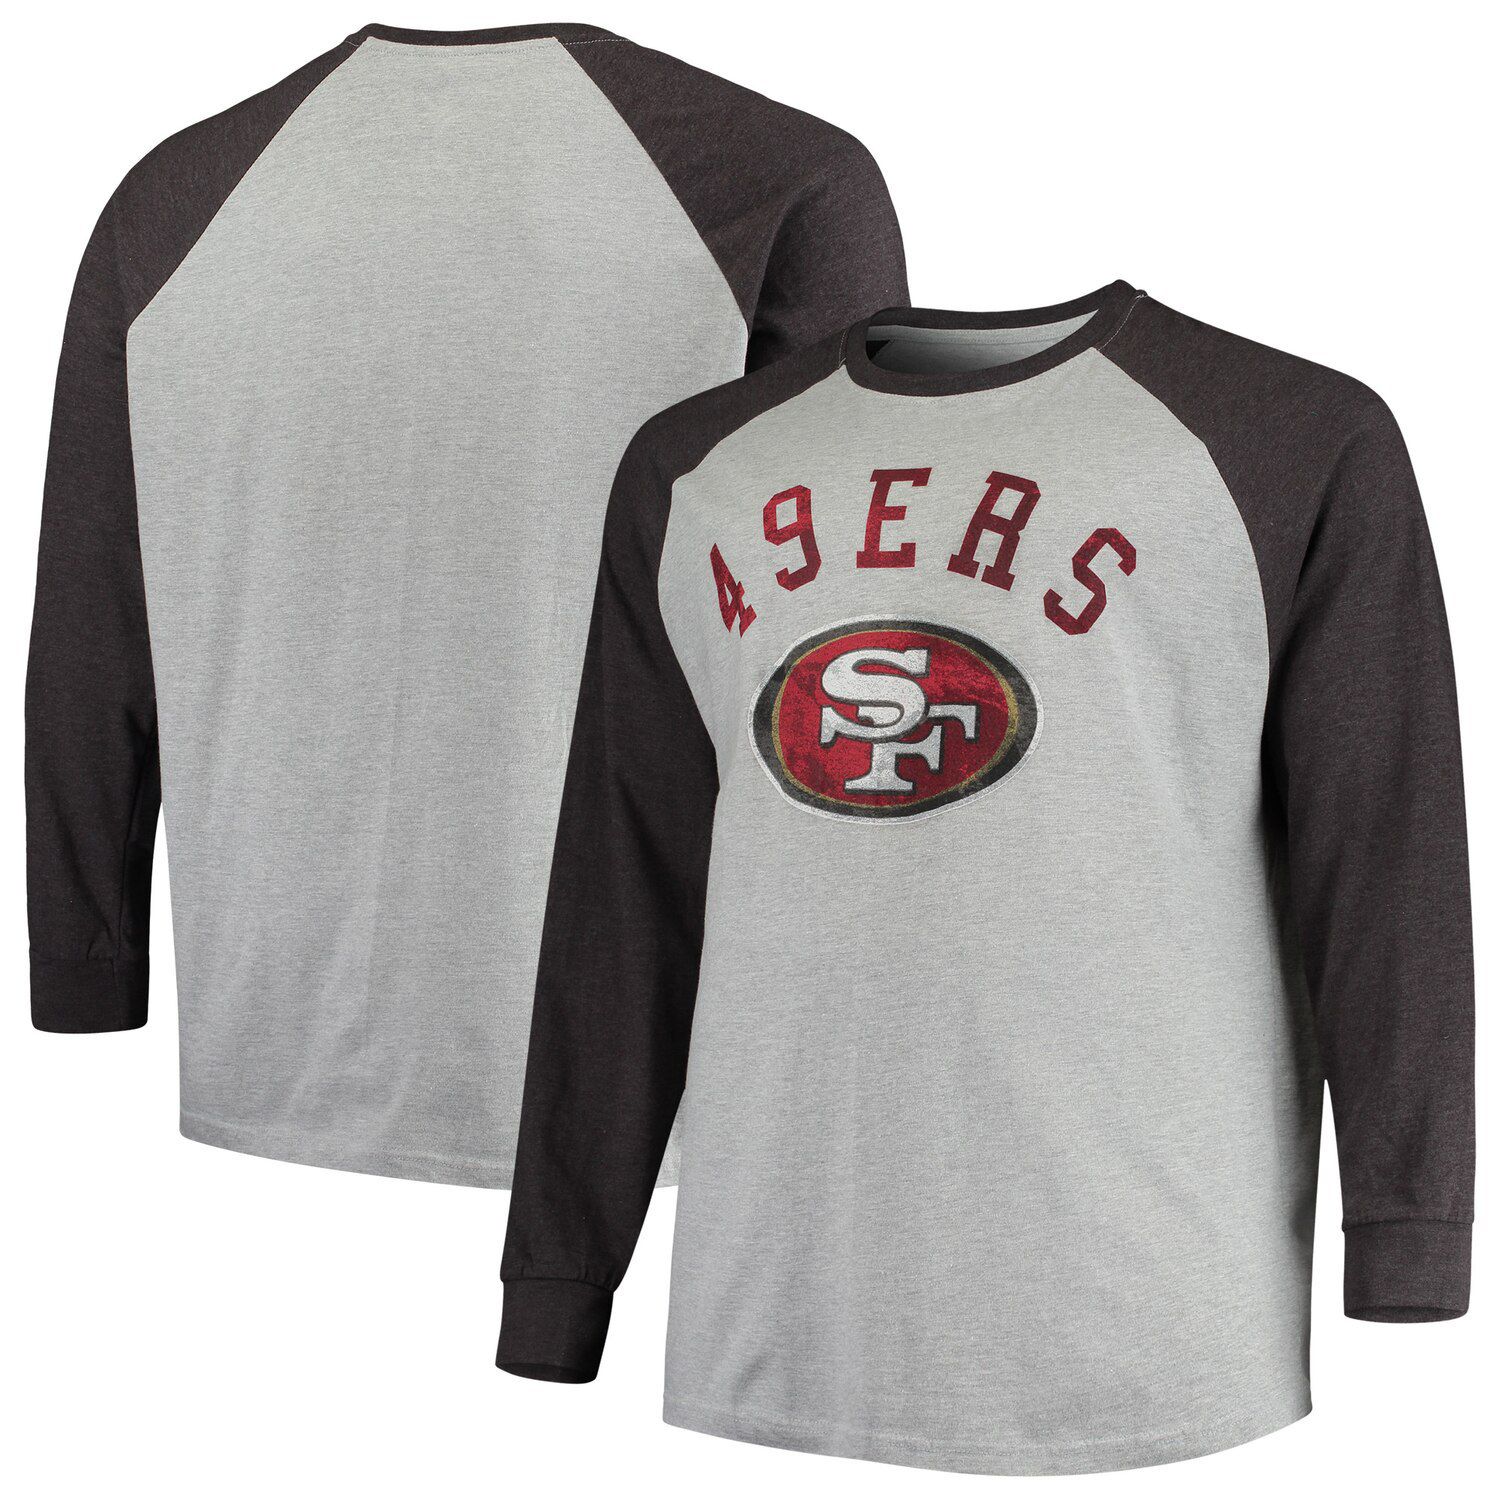 big and tall 49ers jersey